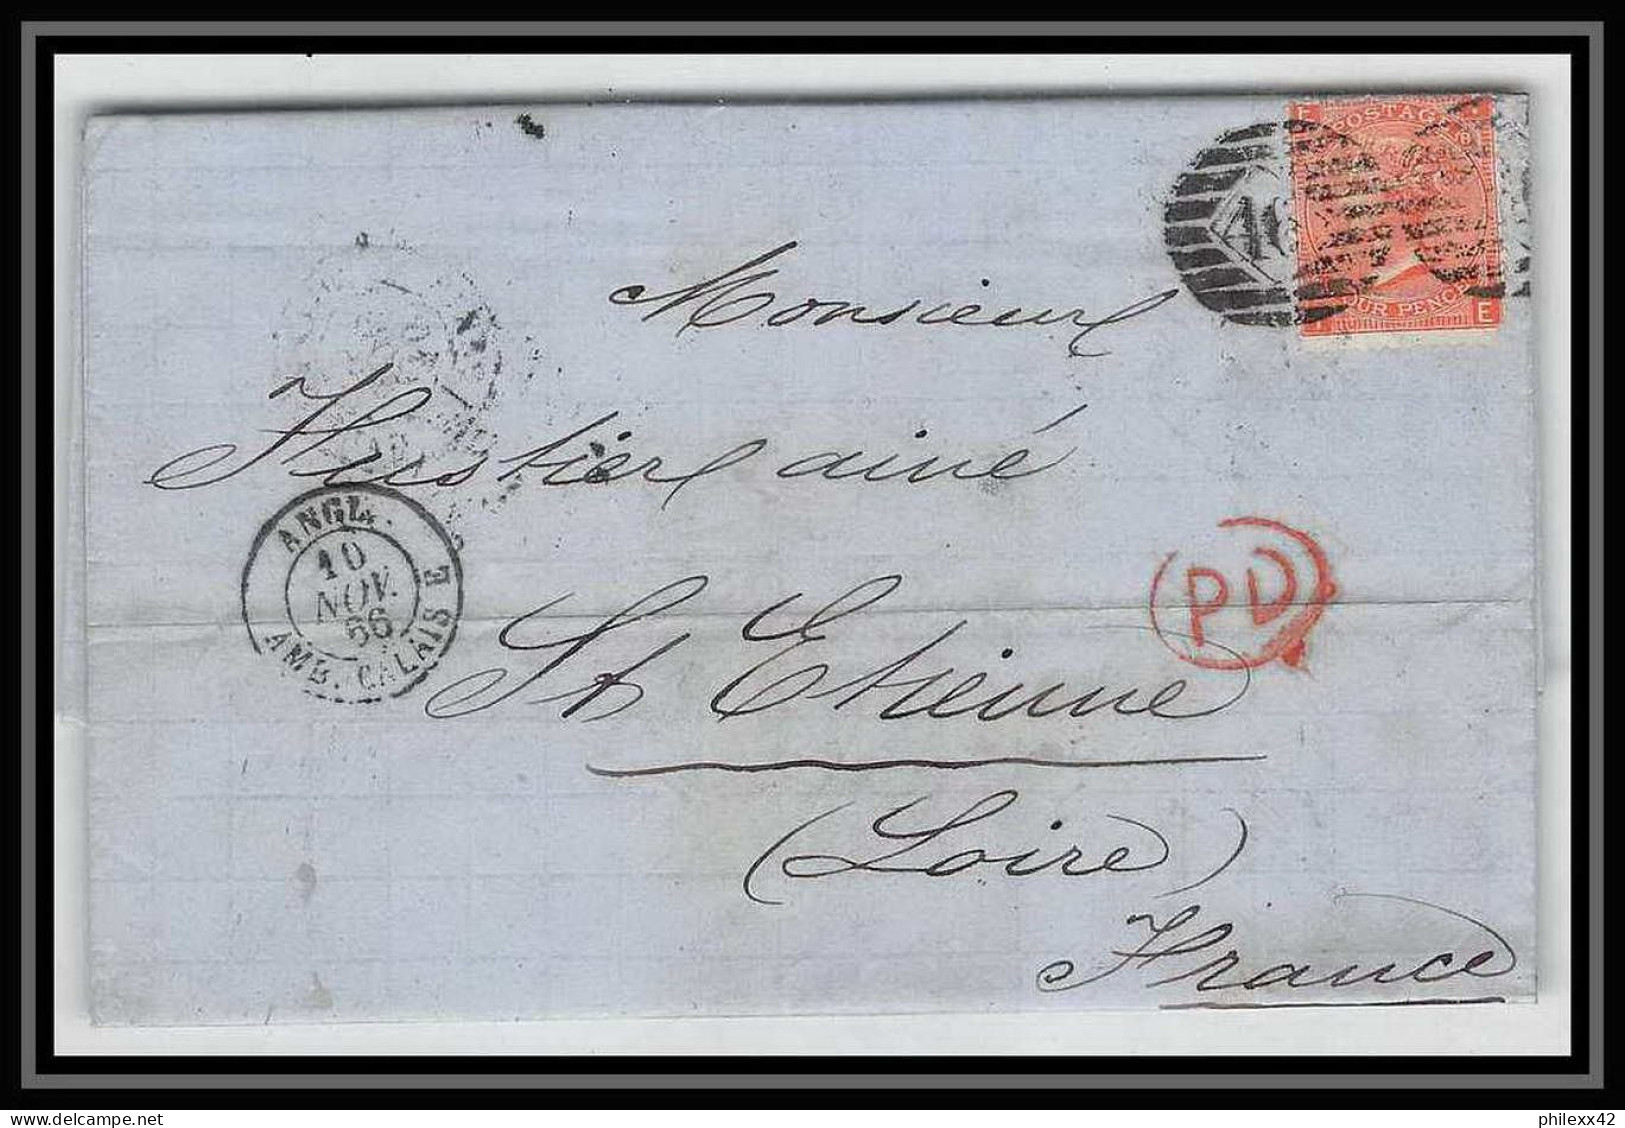 35636 N°32 Victoria 4p Red London St Etienne France 1866 Cachet 46 Lettre Cover Grande Bretagne England - Covers & Documents